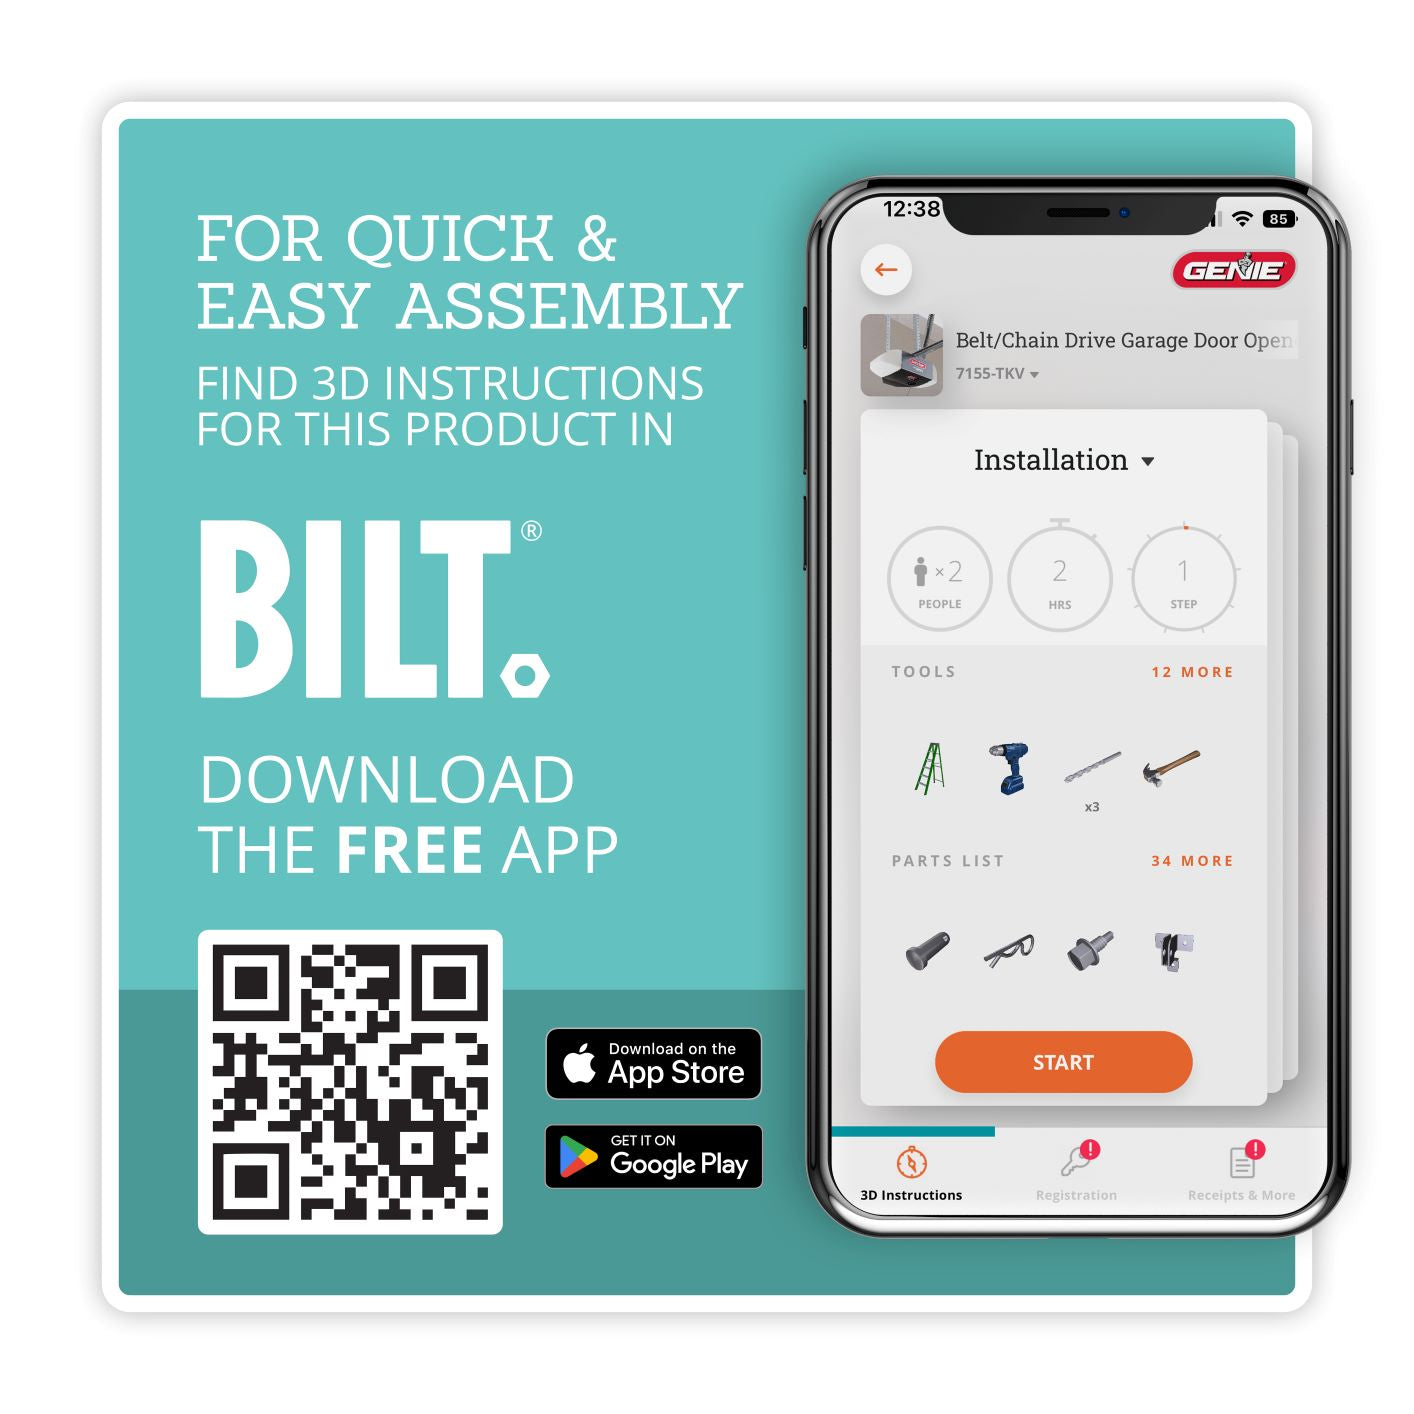 Quick and Easy assembly with the BILT app, download it for free